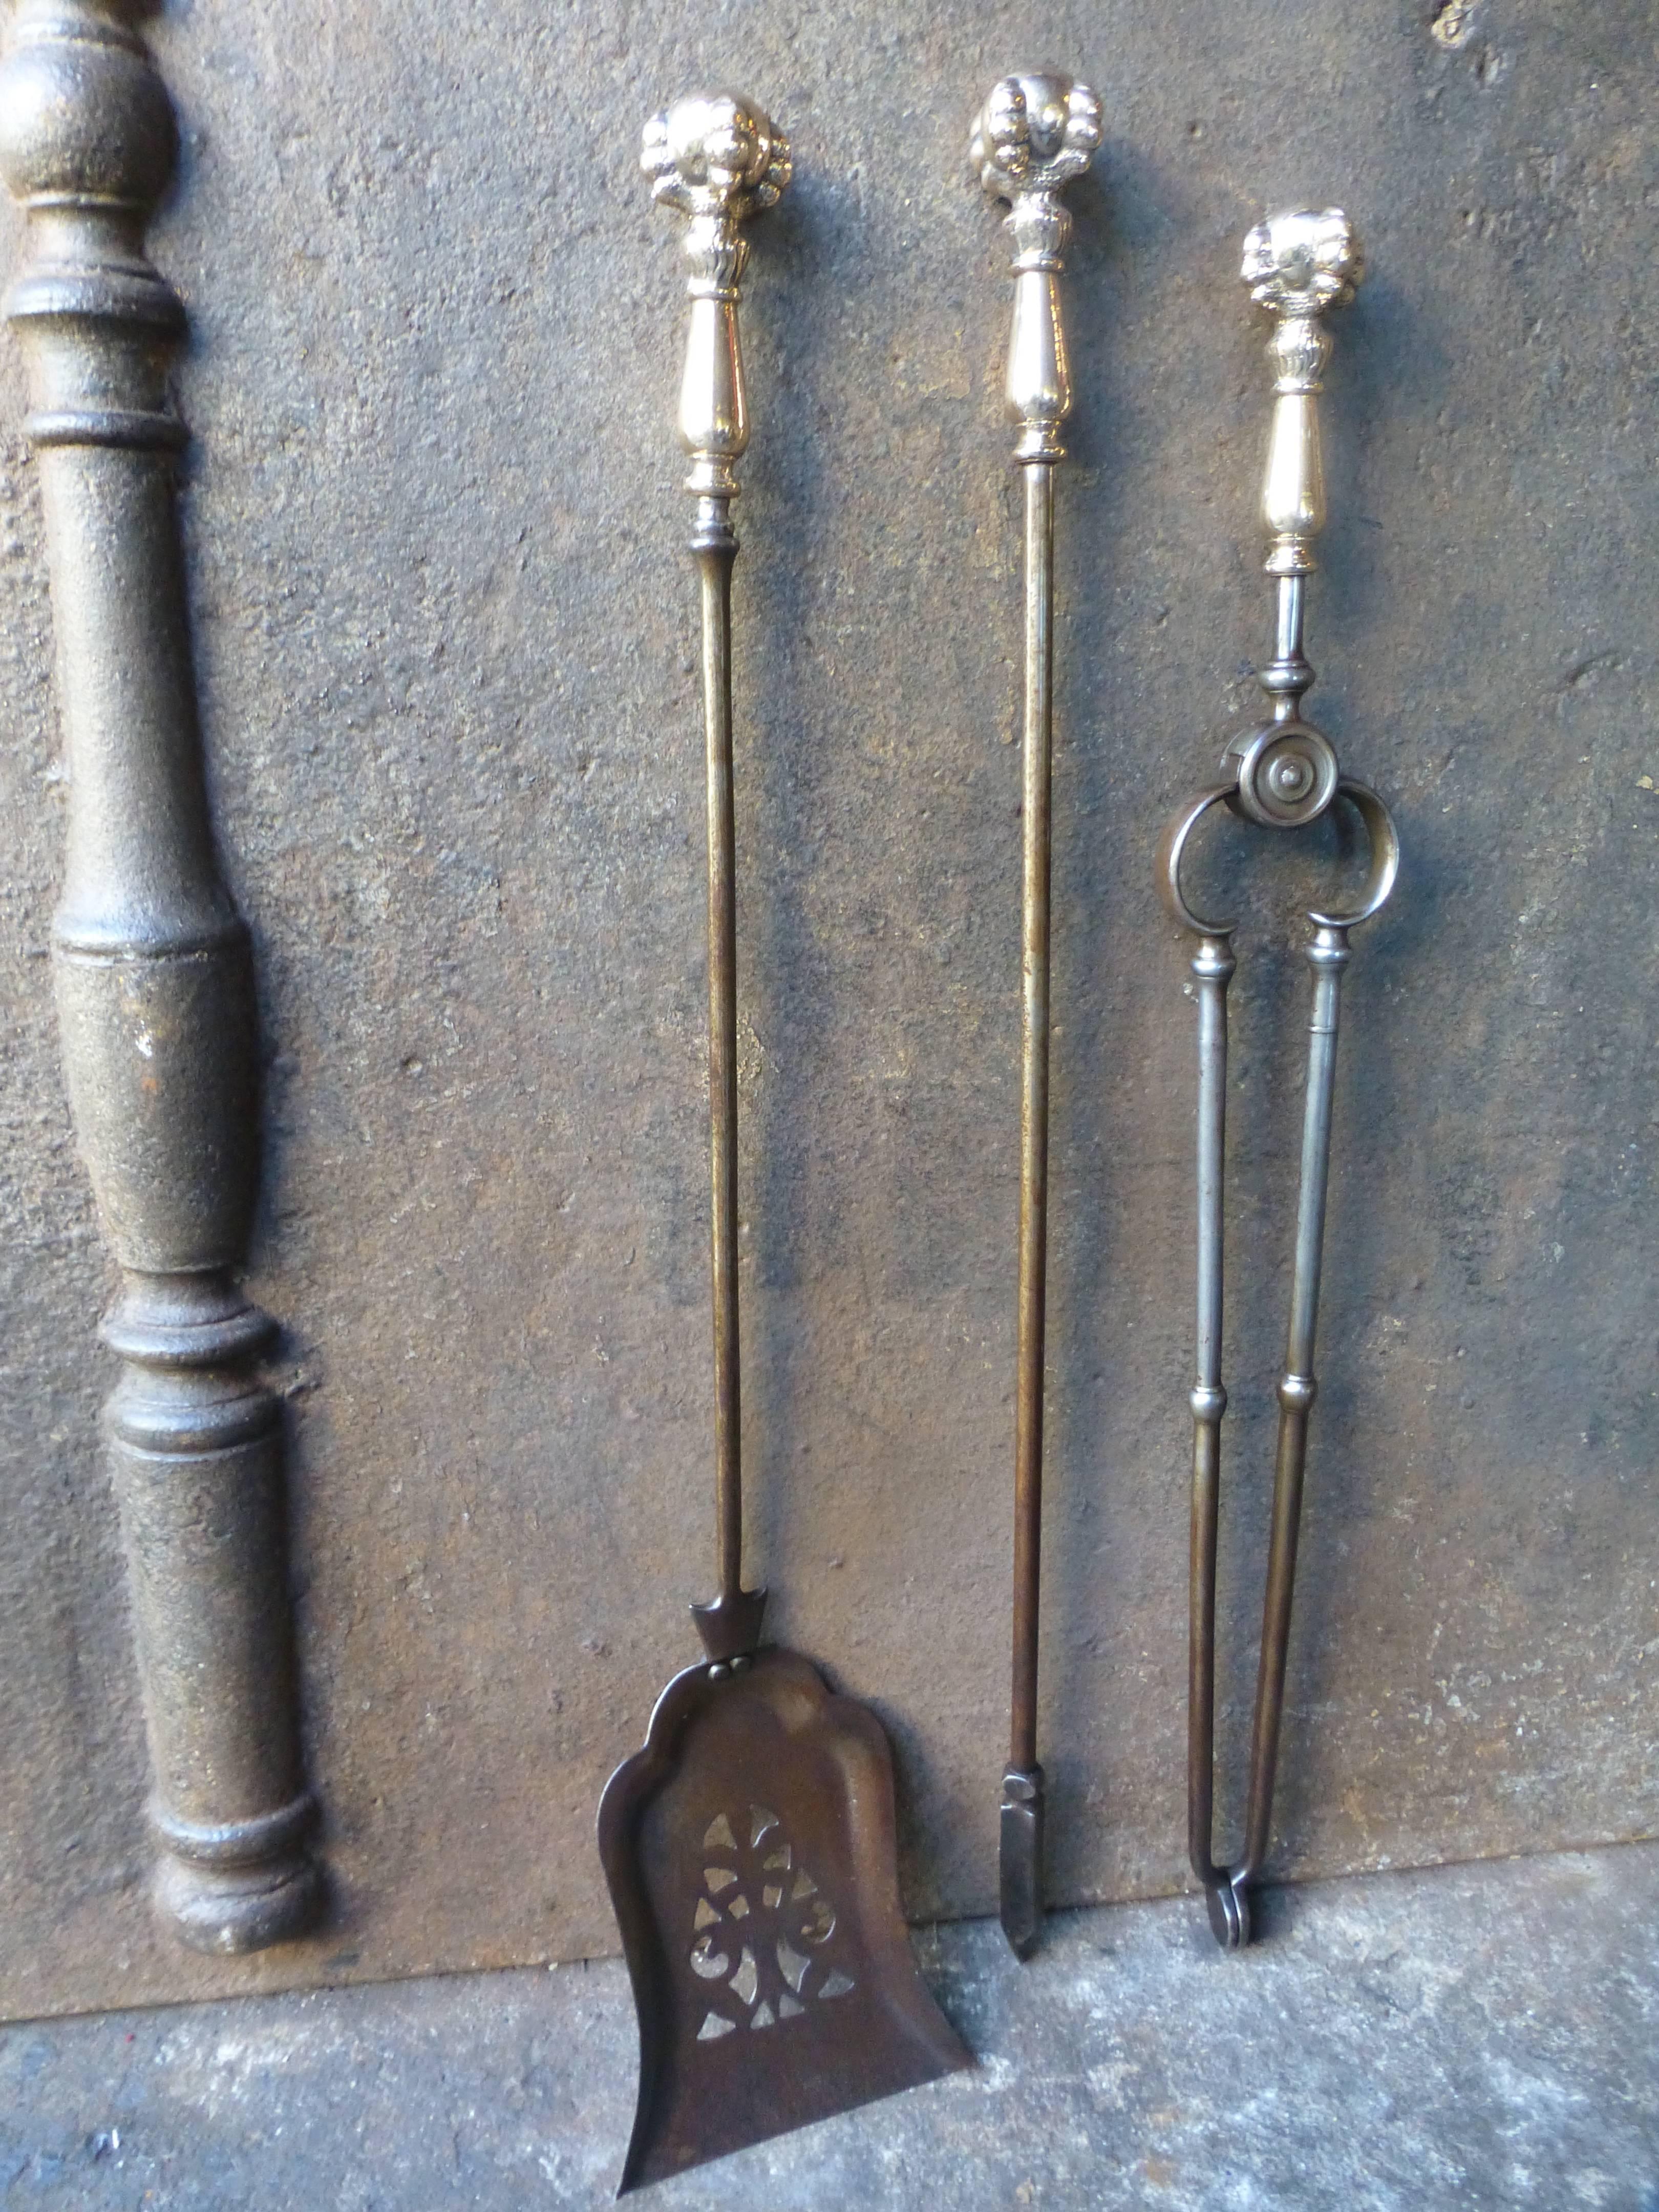 19th century English fireplace tool set made of bronze, polished copper and wrought iron.